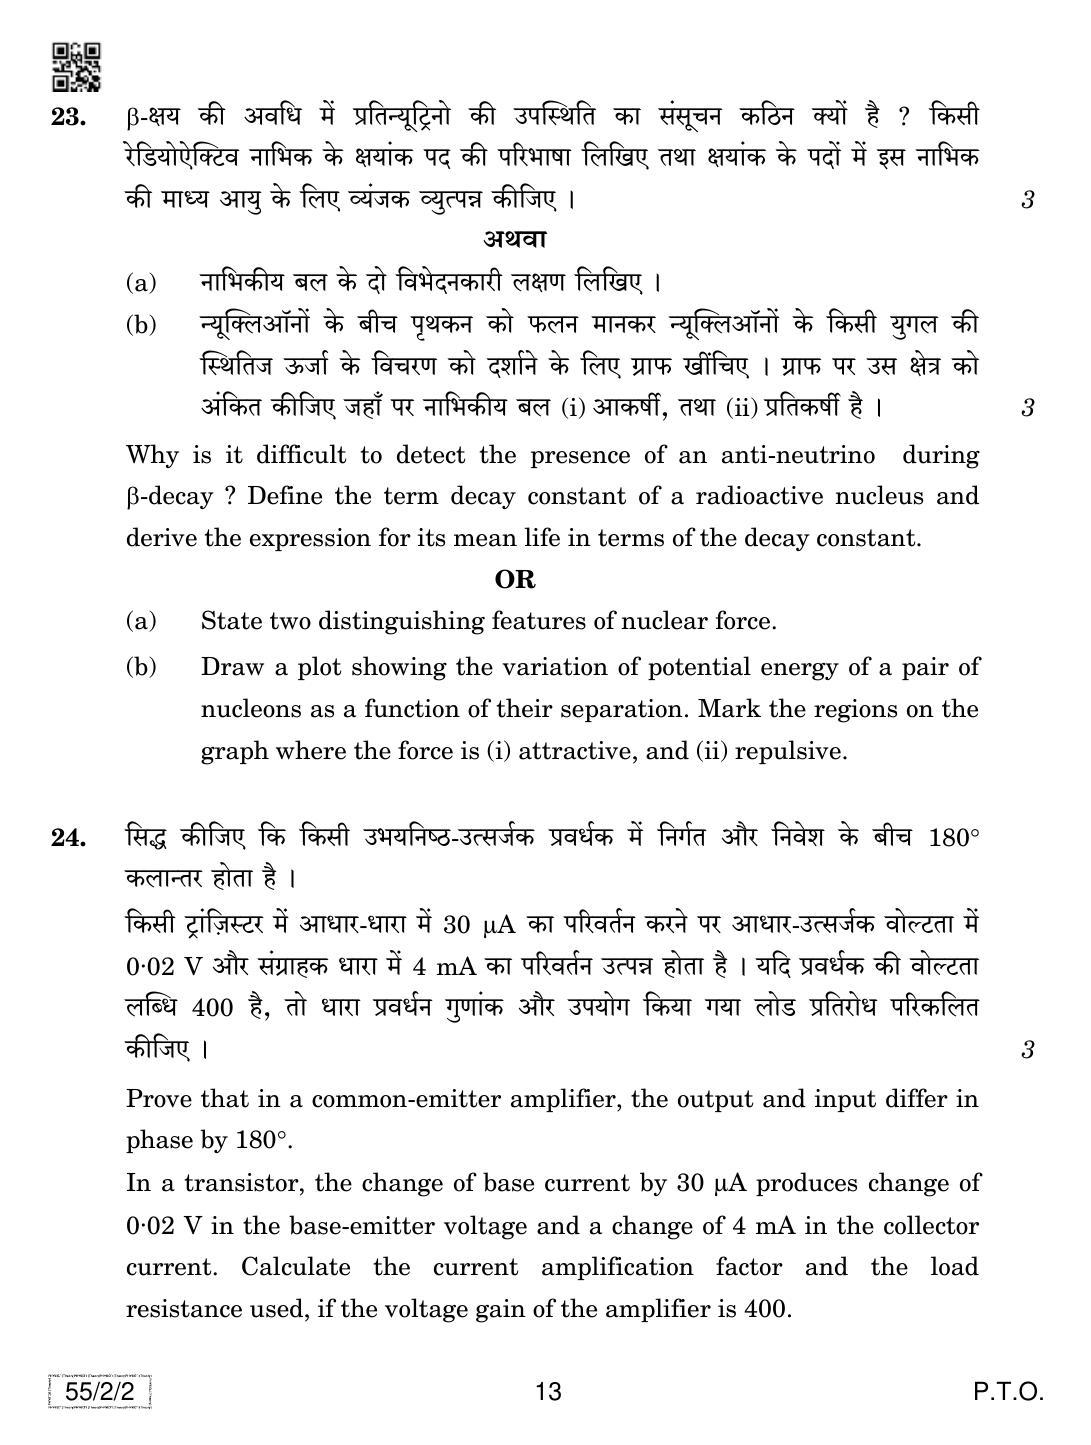 CBSE Class 12 55-2-2 Physics 2019 Question Paper - Page 13